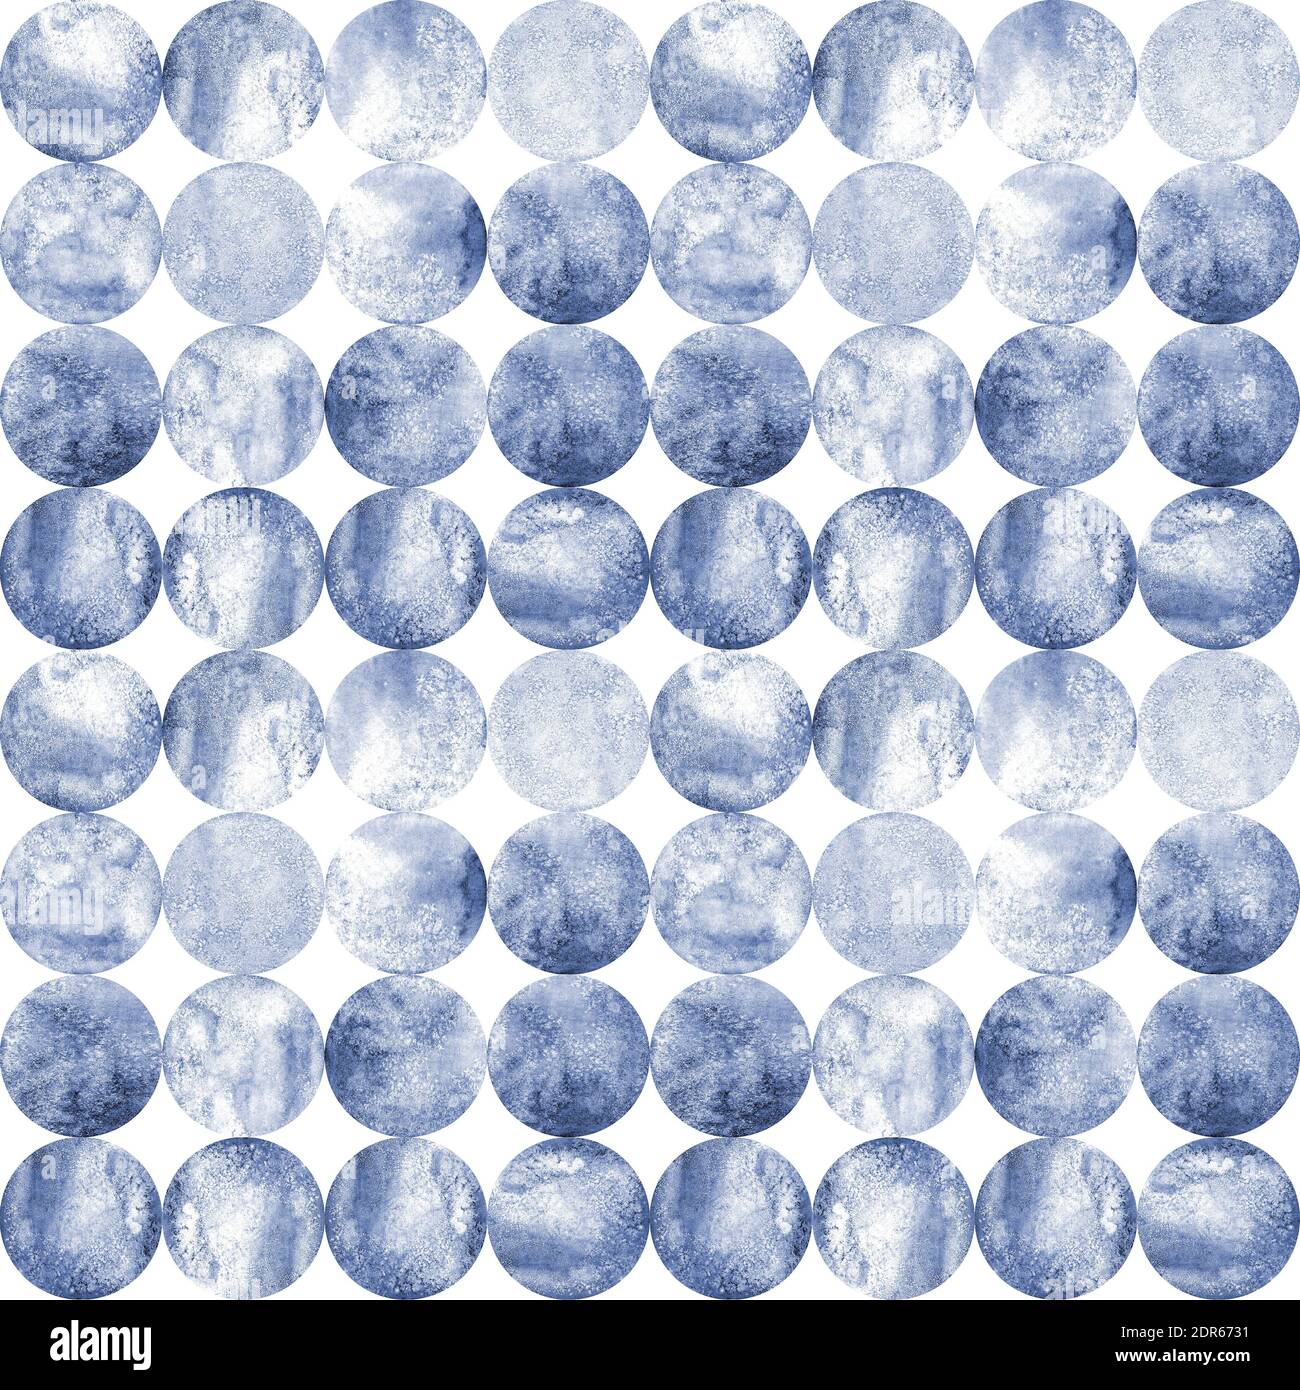 Abstract watercolor background with indigo blue circles on white. Watercolor hand drawn navy color seamless pattern. Watercolour round shaped texture. Stock Photo